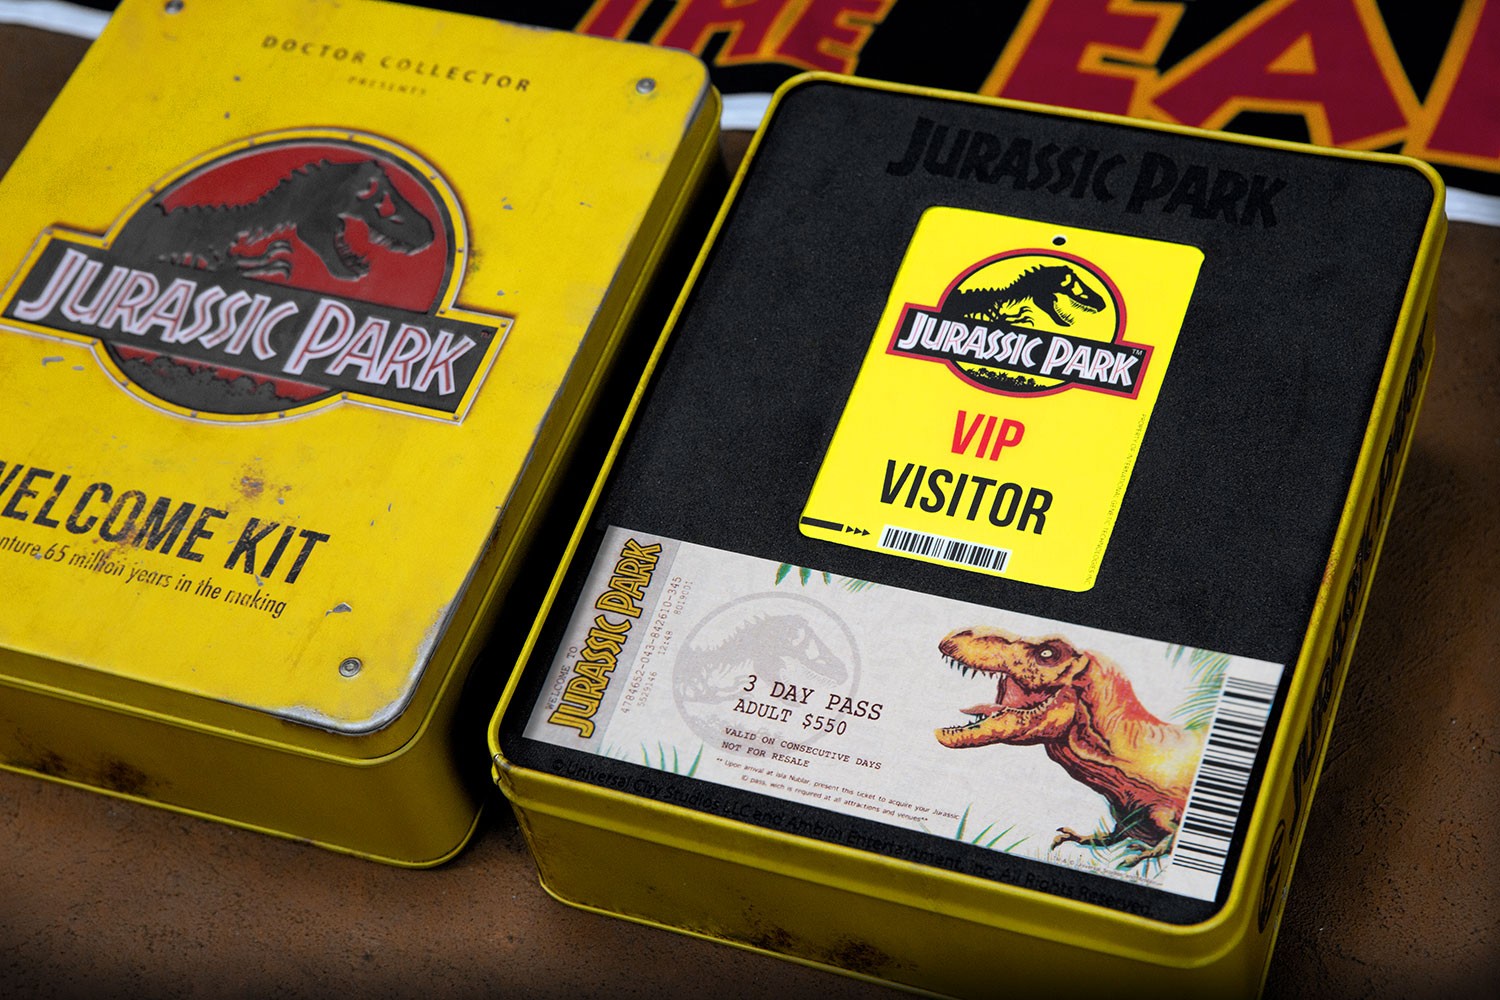 Jurassic Park Welcome Kit (Standard Edition) View 19